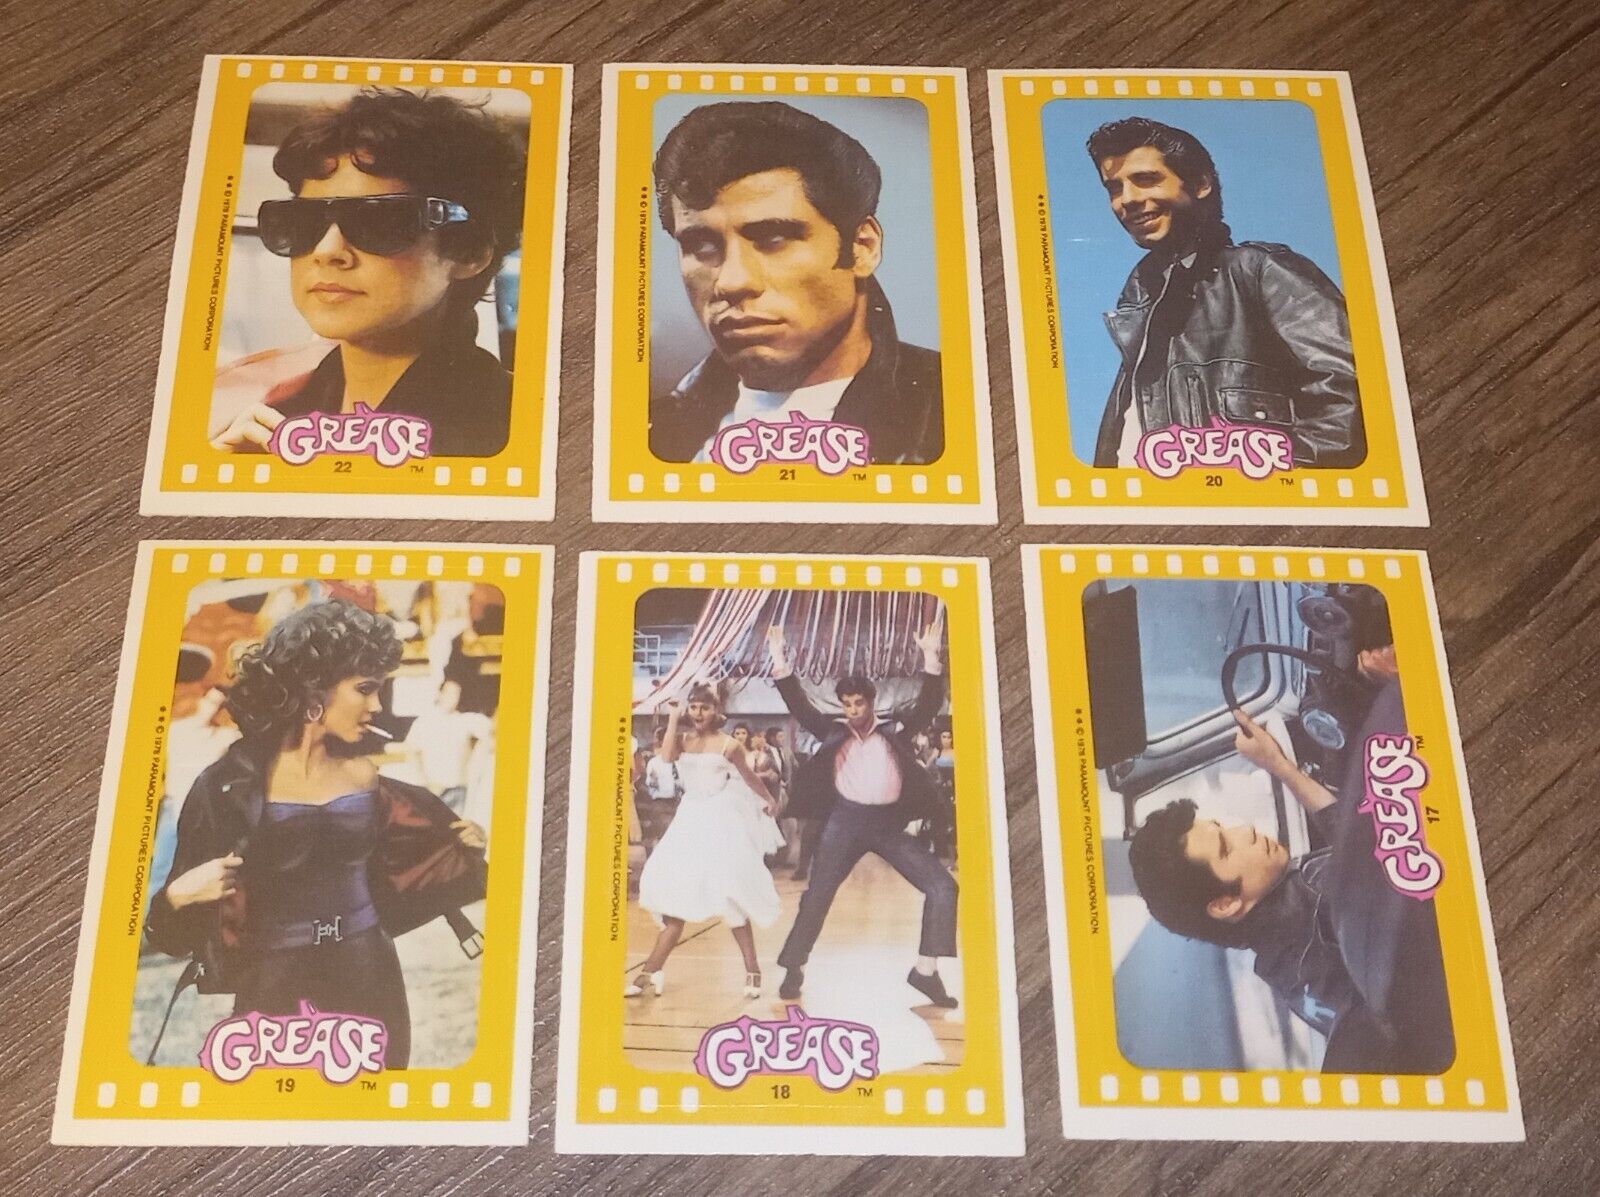 1978 Topps GREASE Movie Series 2 Stickers Vintage Card Set 11 Sticker Cards